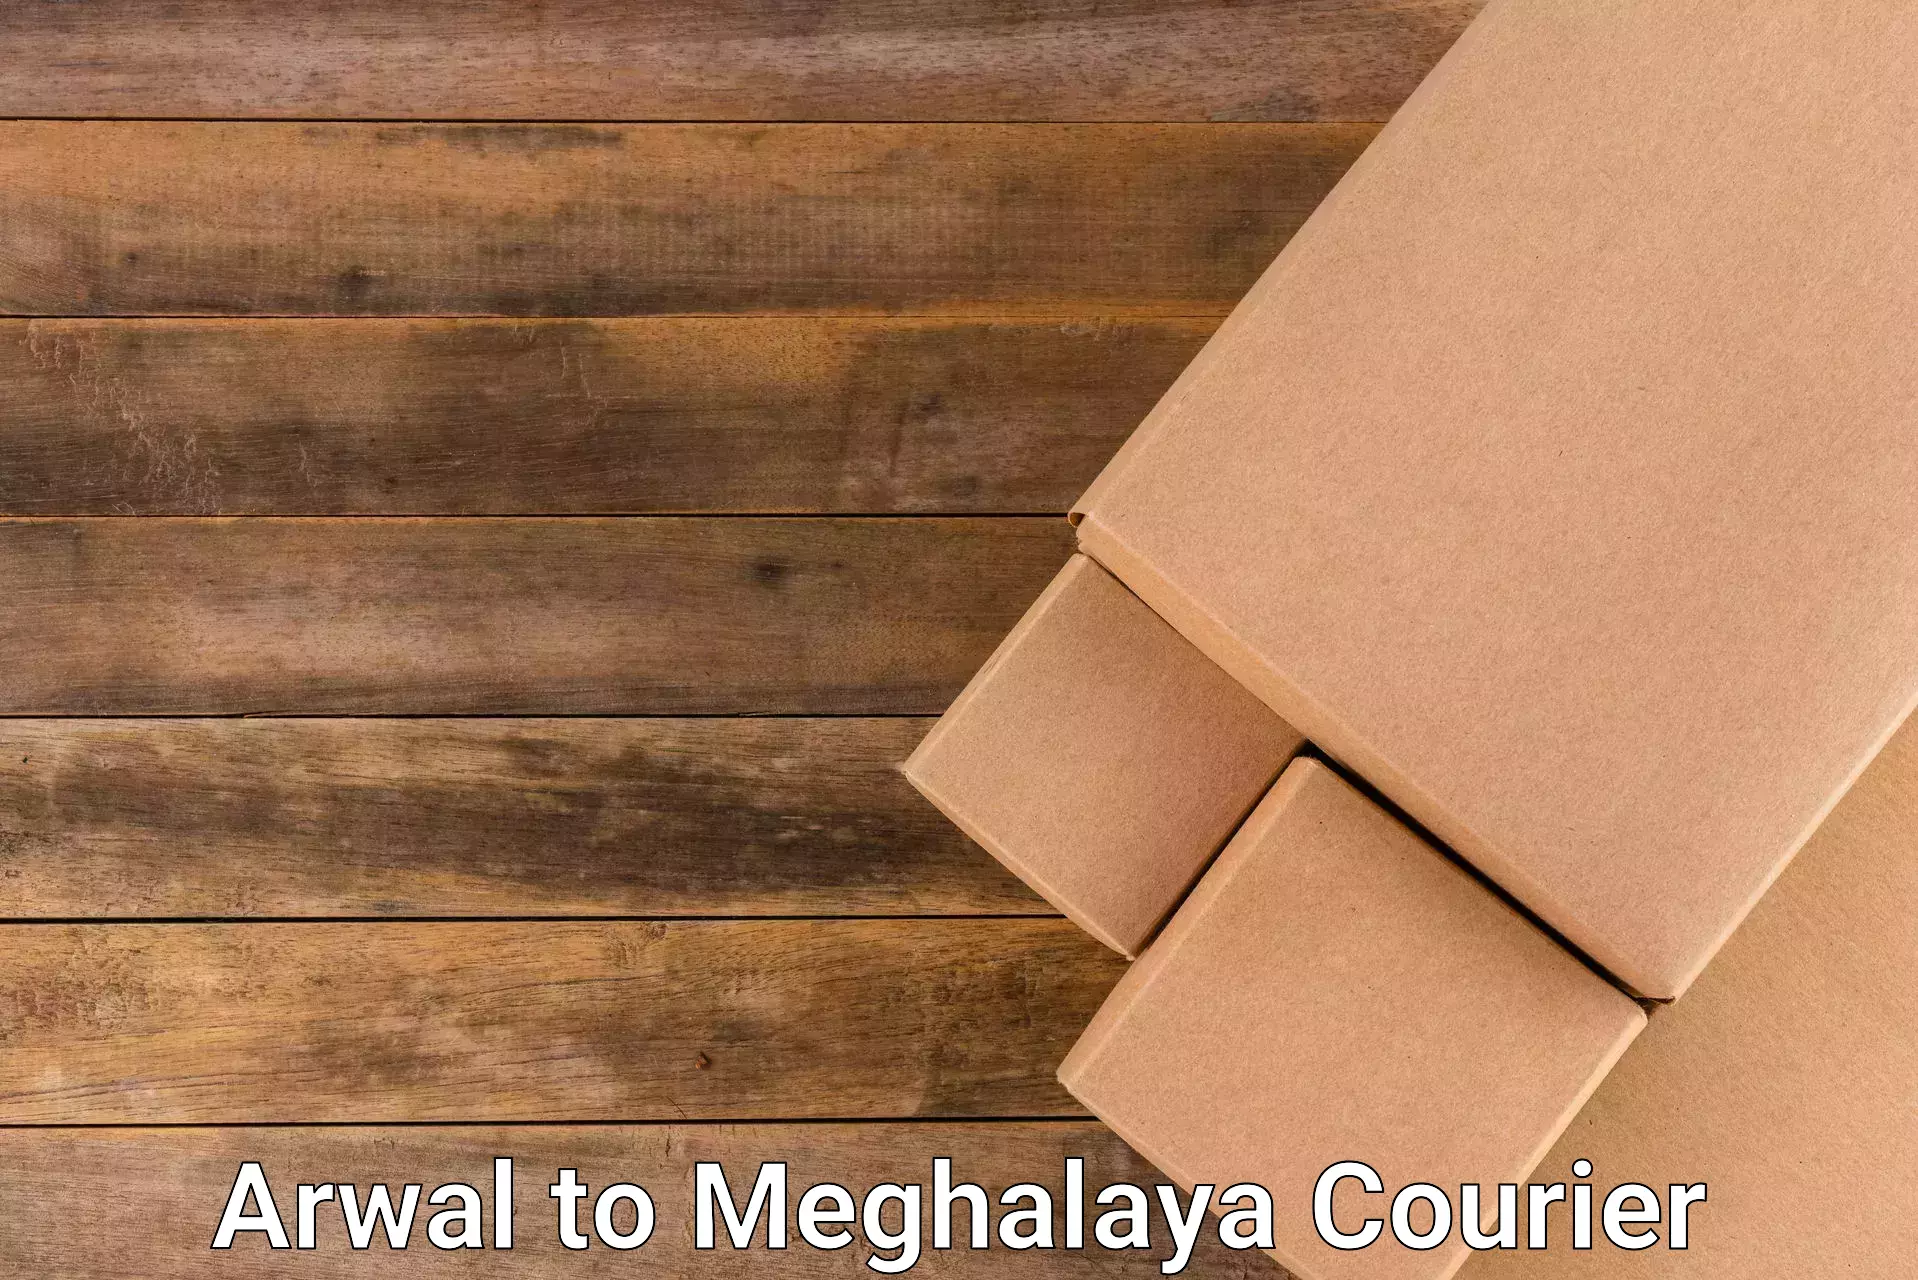 Cargo delivery service Arwal to Meghalaya